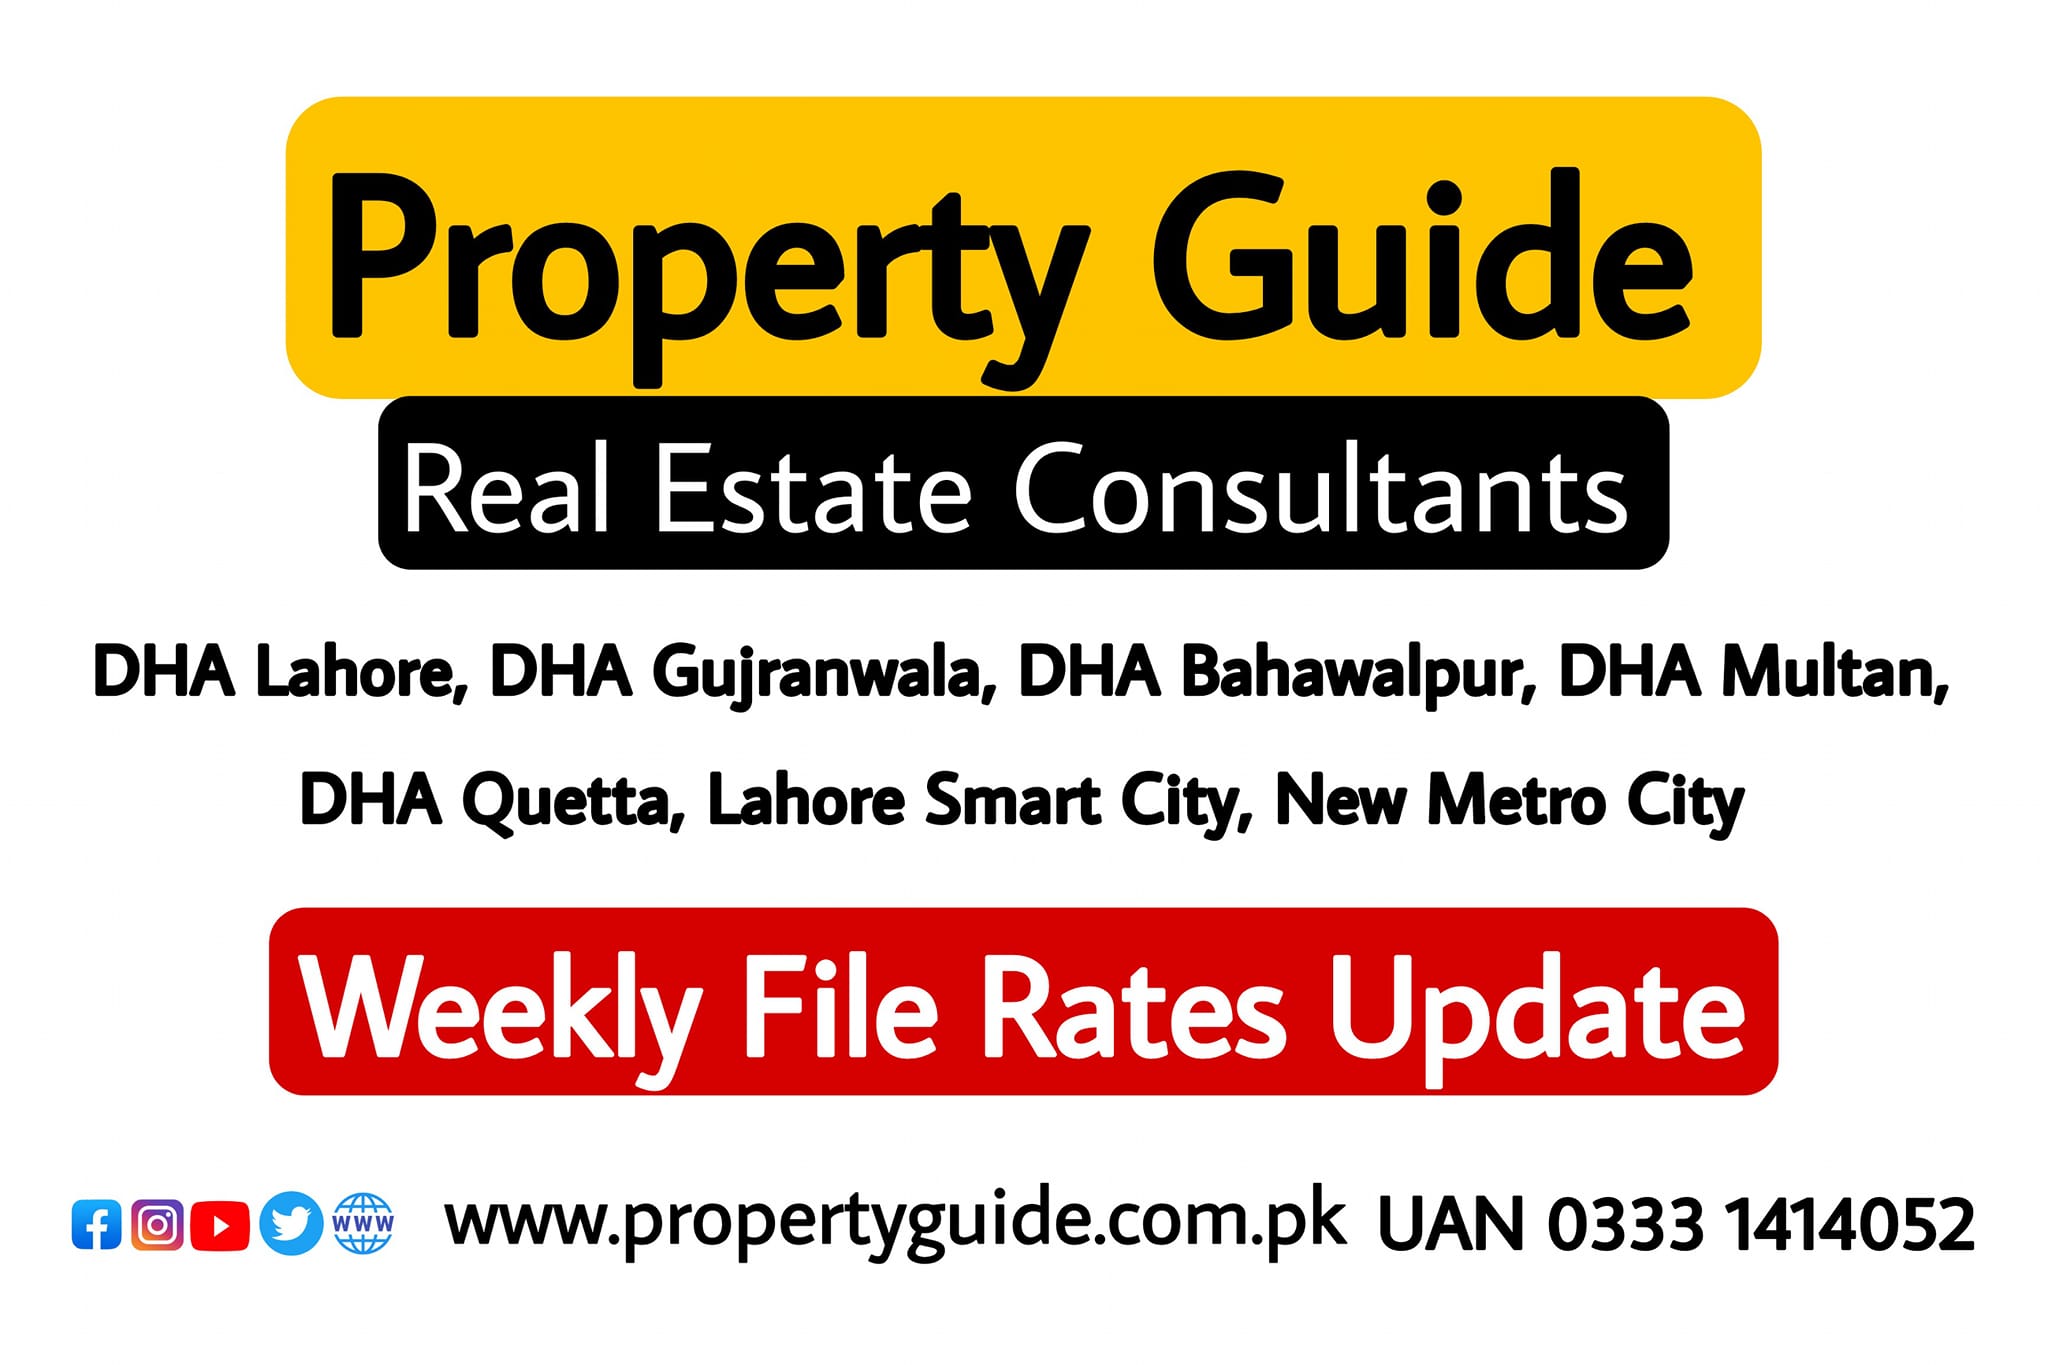 DHA Phase 13 File Rates - Property Guide